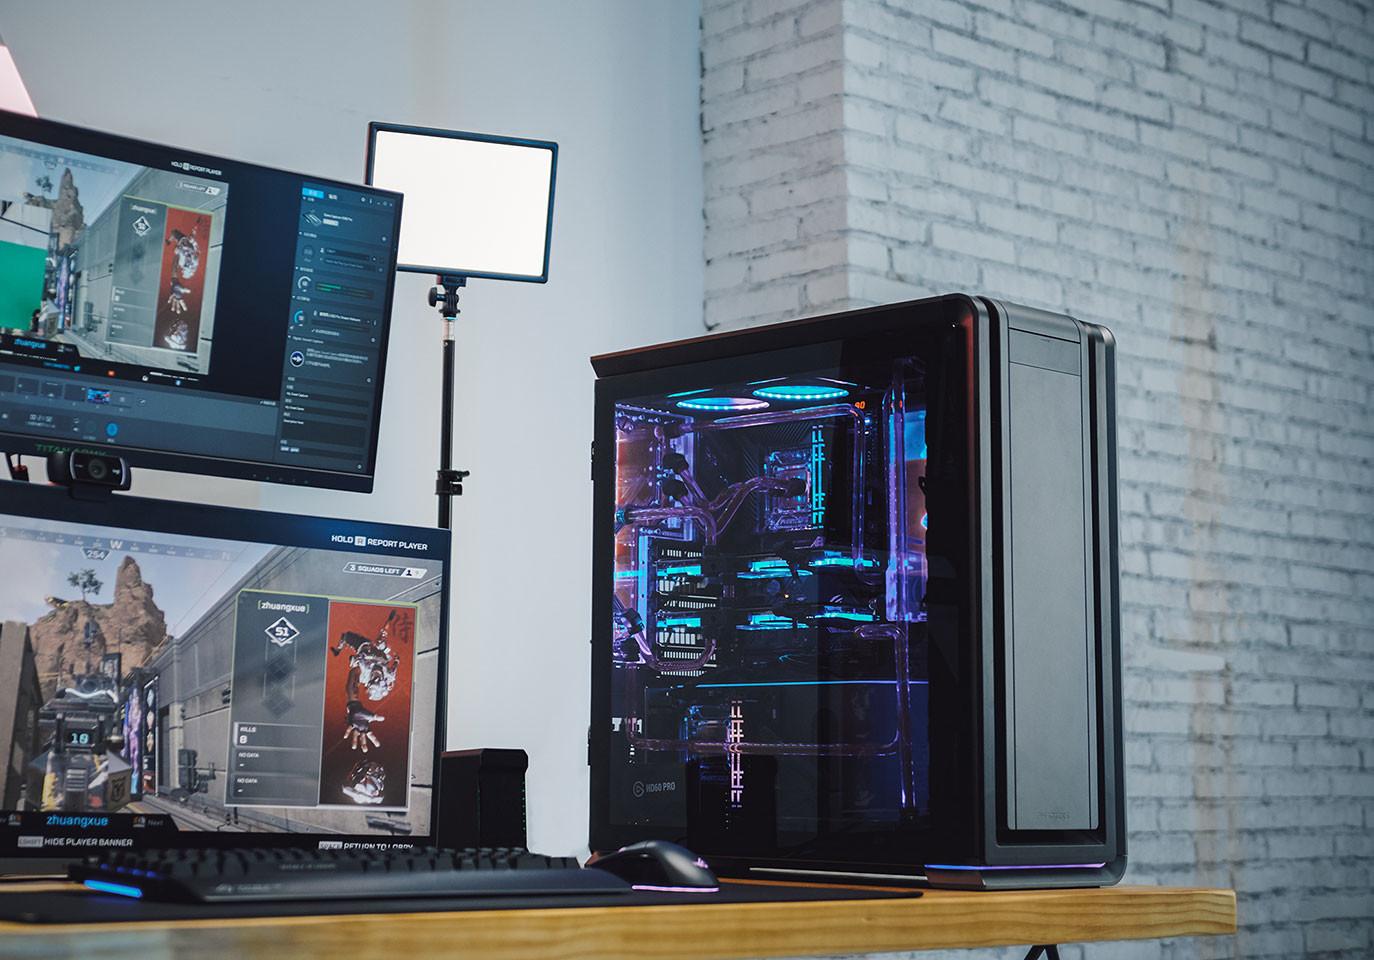 More information about "Η Phanteks ανακοινώνει το Enthoo Luxe 2"